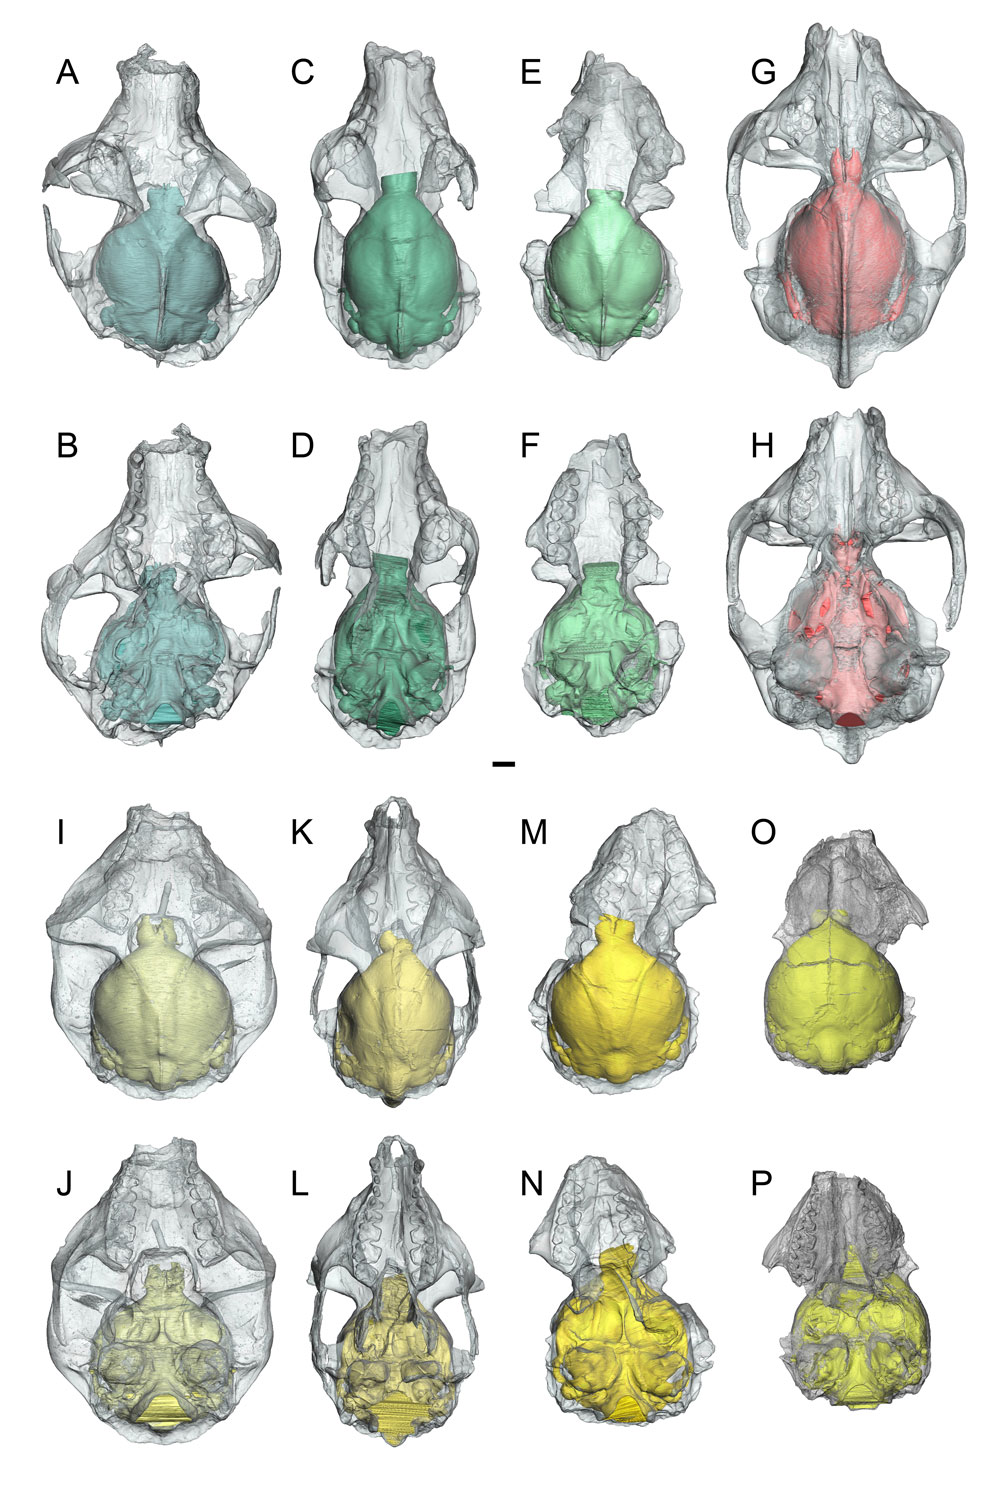 Top and bottom views, respectively, of the virtual brains of Notharctus tenebrosus (A, B, C, E and F), Adapis parisiensis (G and H) and Smilodectes gracilis (bottom two rows) within transparent renderings of their skulls. 